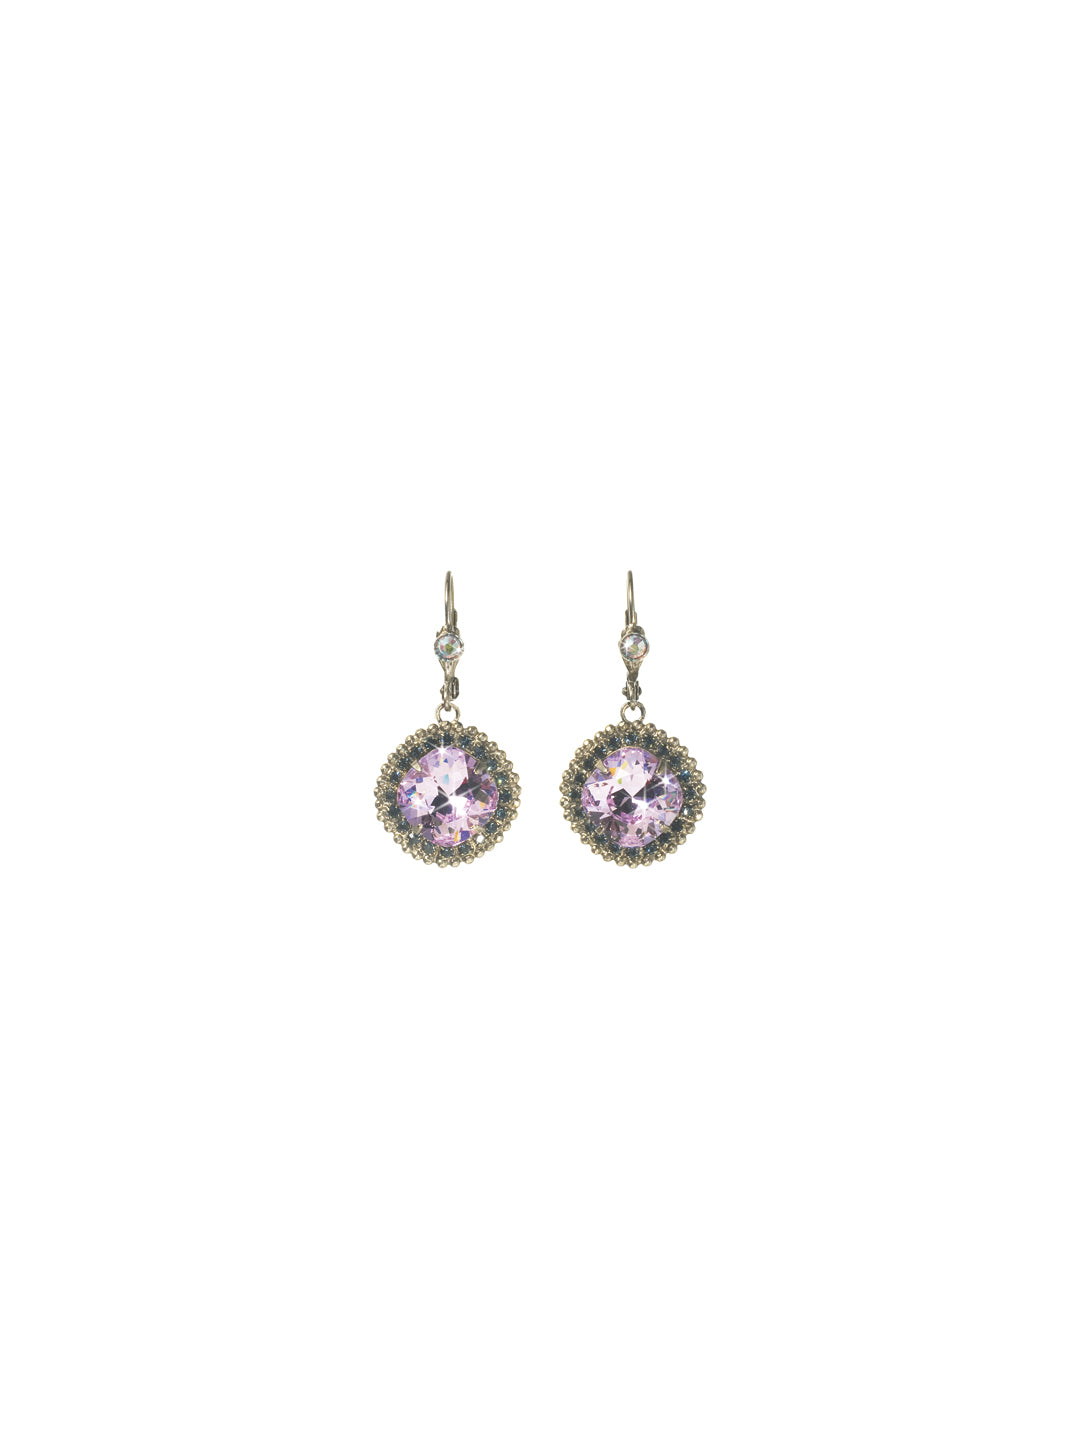 Cushion Cut Drop Dangle Earrings - ECB20ASHY - Behold graceful glamour at its finest. A cushion cut crystal surrounded by round gemstones hangs from a decorative hinge back clasp. From Sorrelli's Hydrangea collection in our Antique Silver-tone finish.